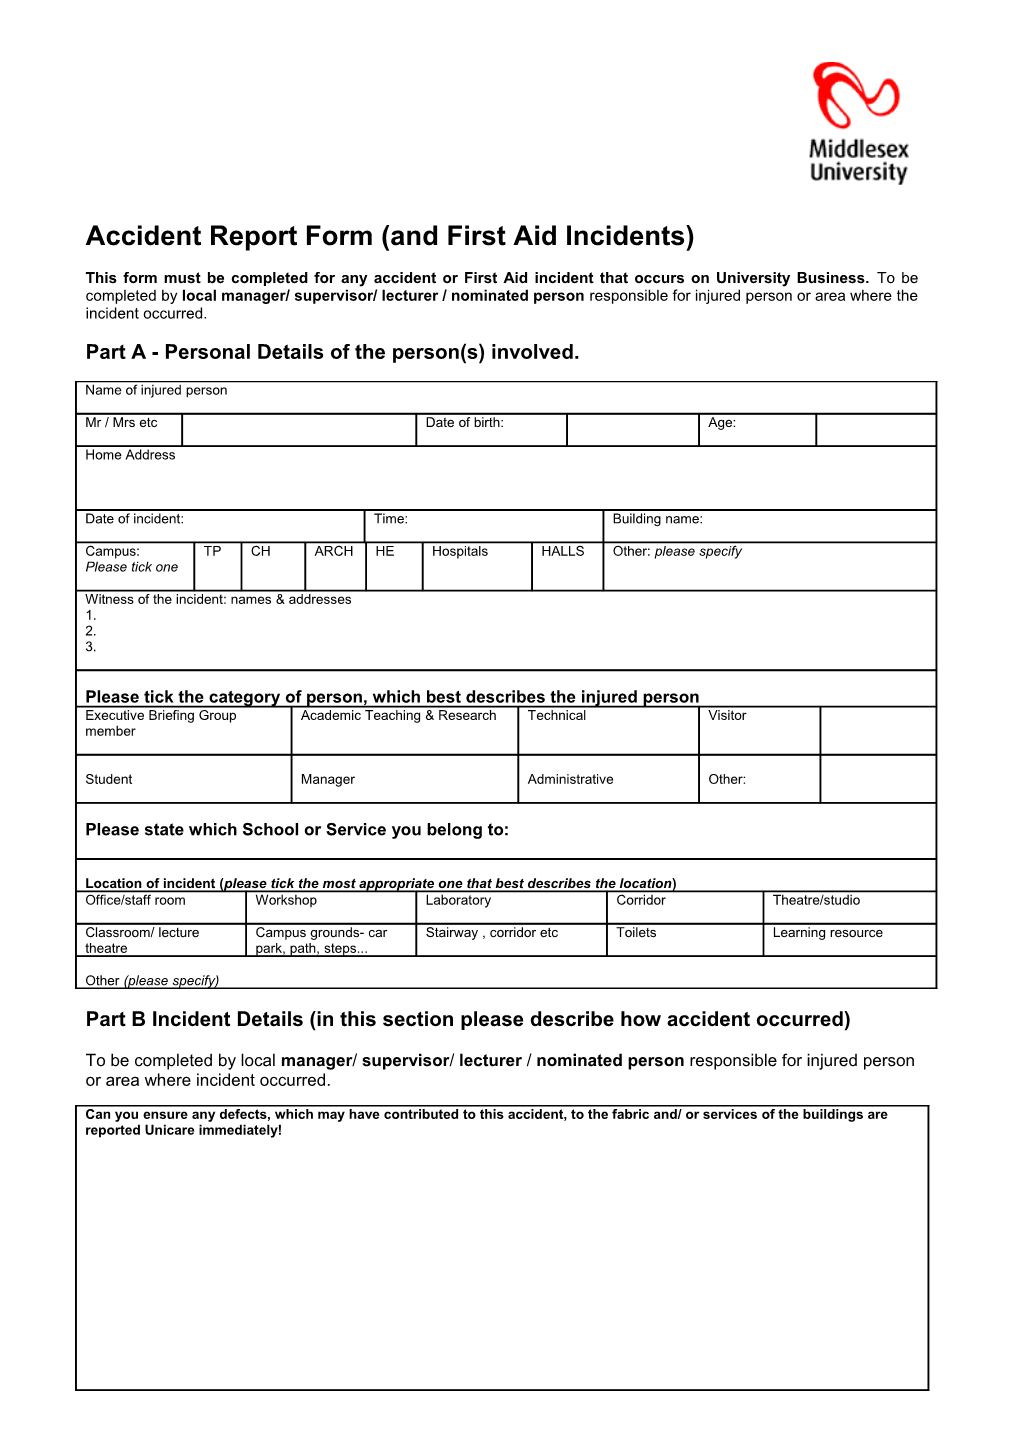 Accident Report Form (And First Aid Incidents)